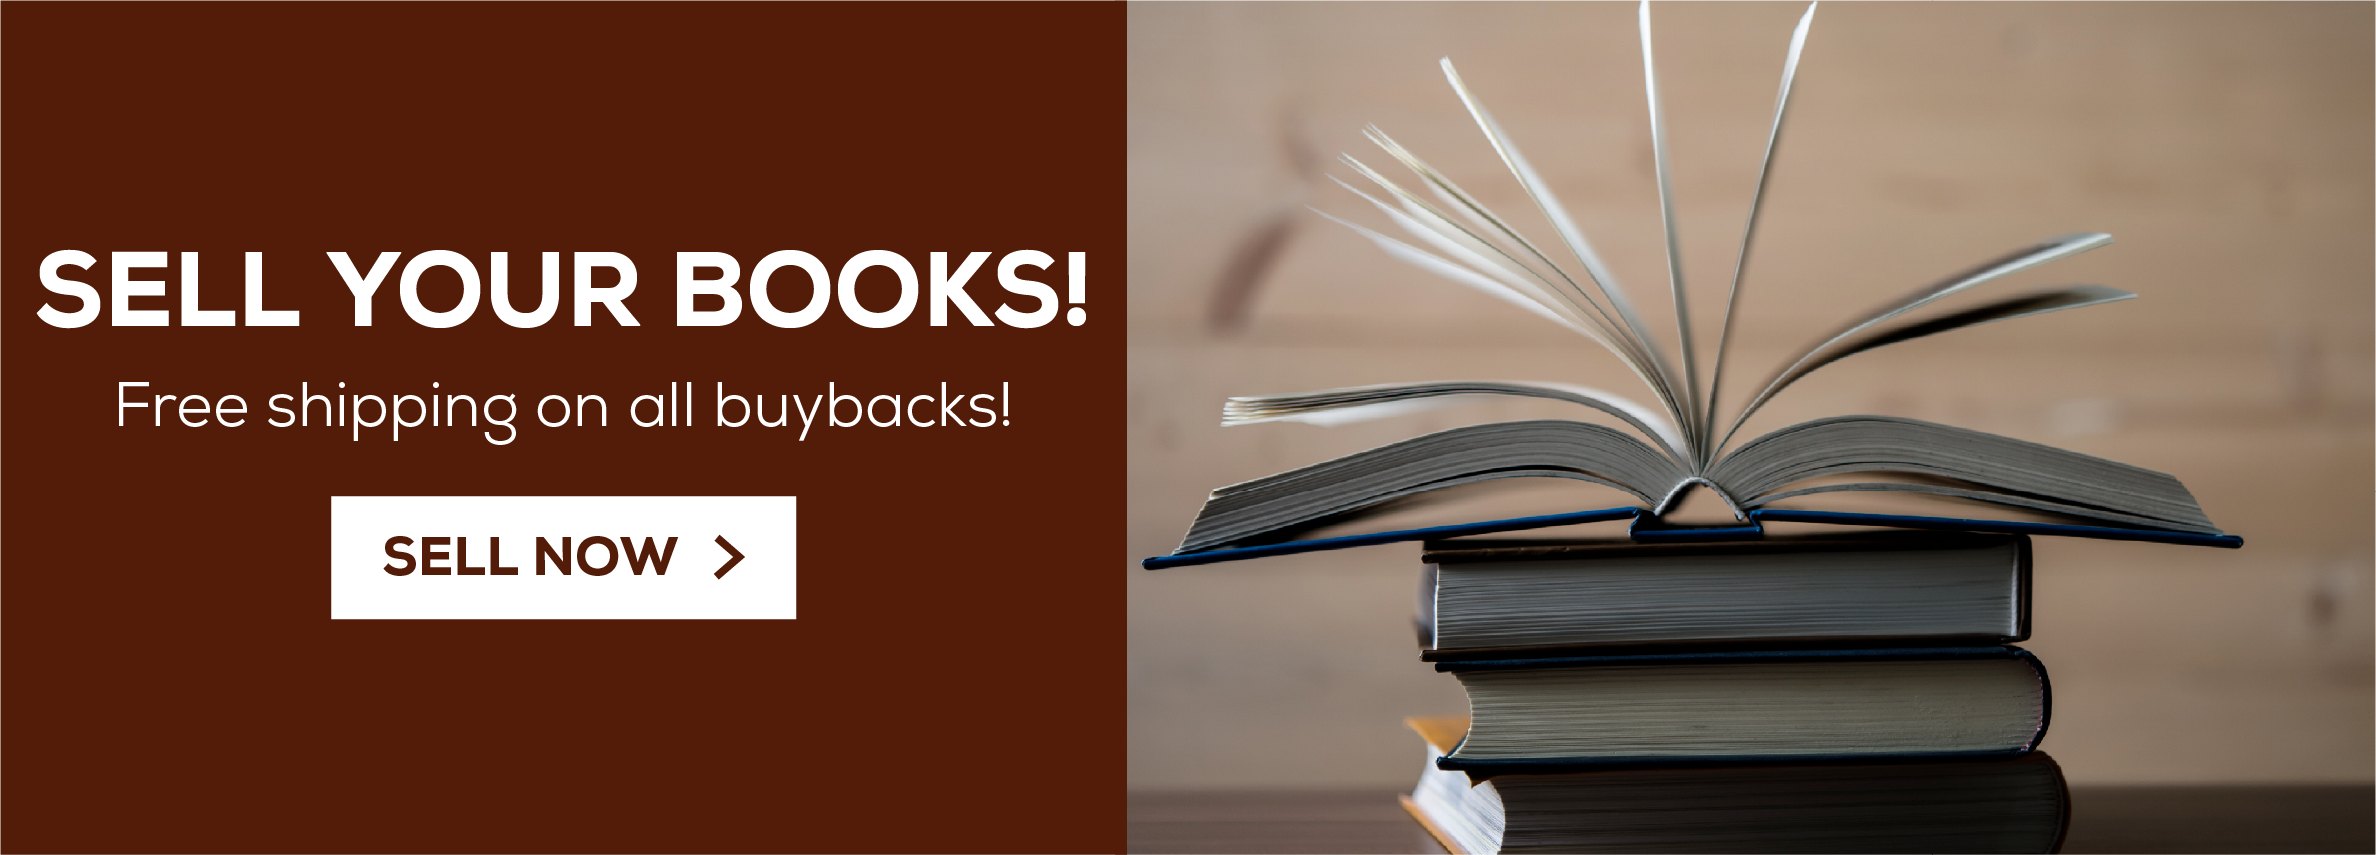 Sell you books! Free shipping on all buybacks! Sell now